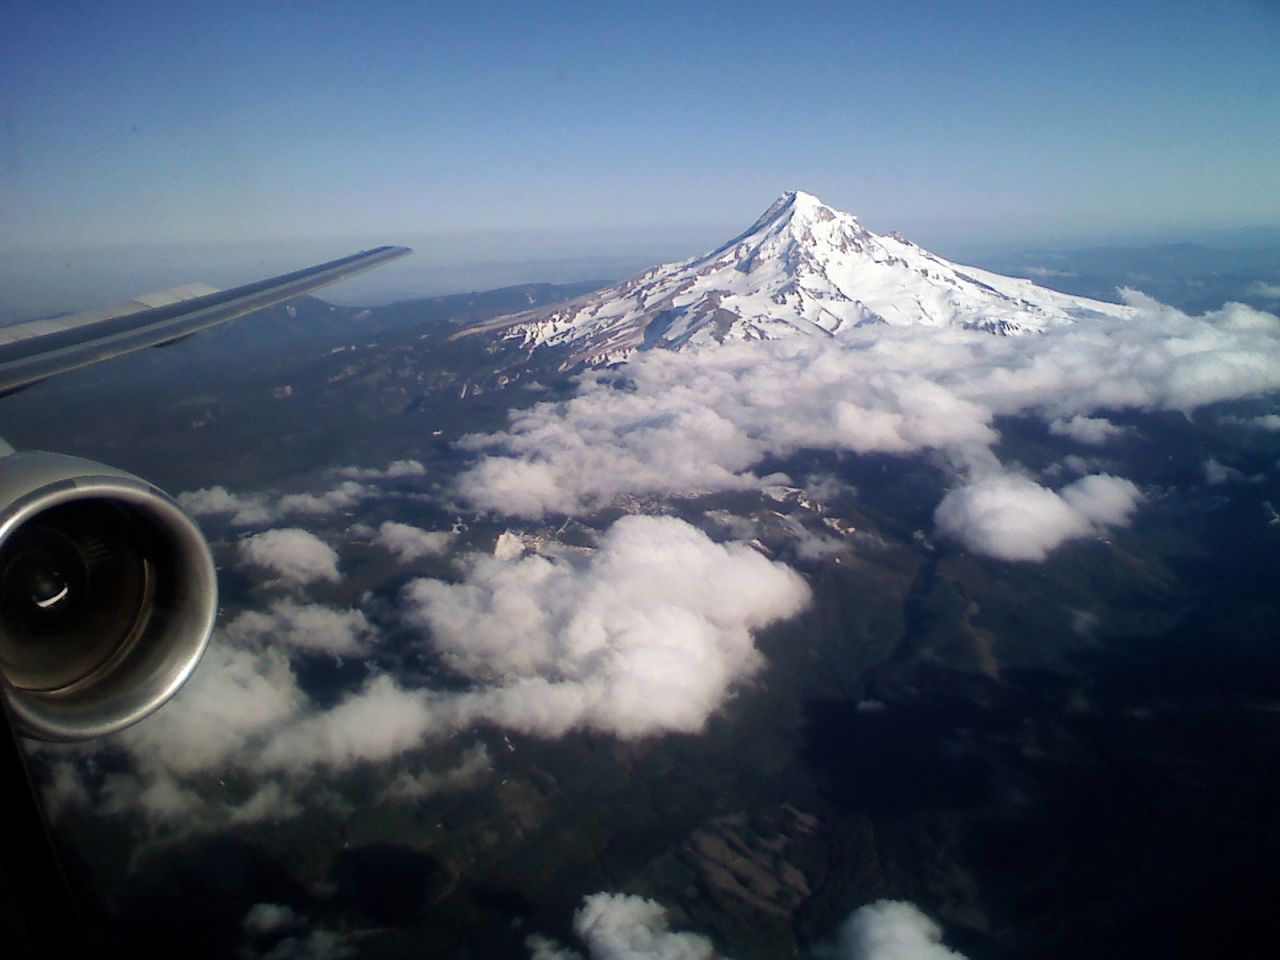 Joseph Rogge got this great shot of Mount Hood on a flight into Portland, Oregon. "There is much beauty in the world, sometimes you see it from unexpected perspectives."